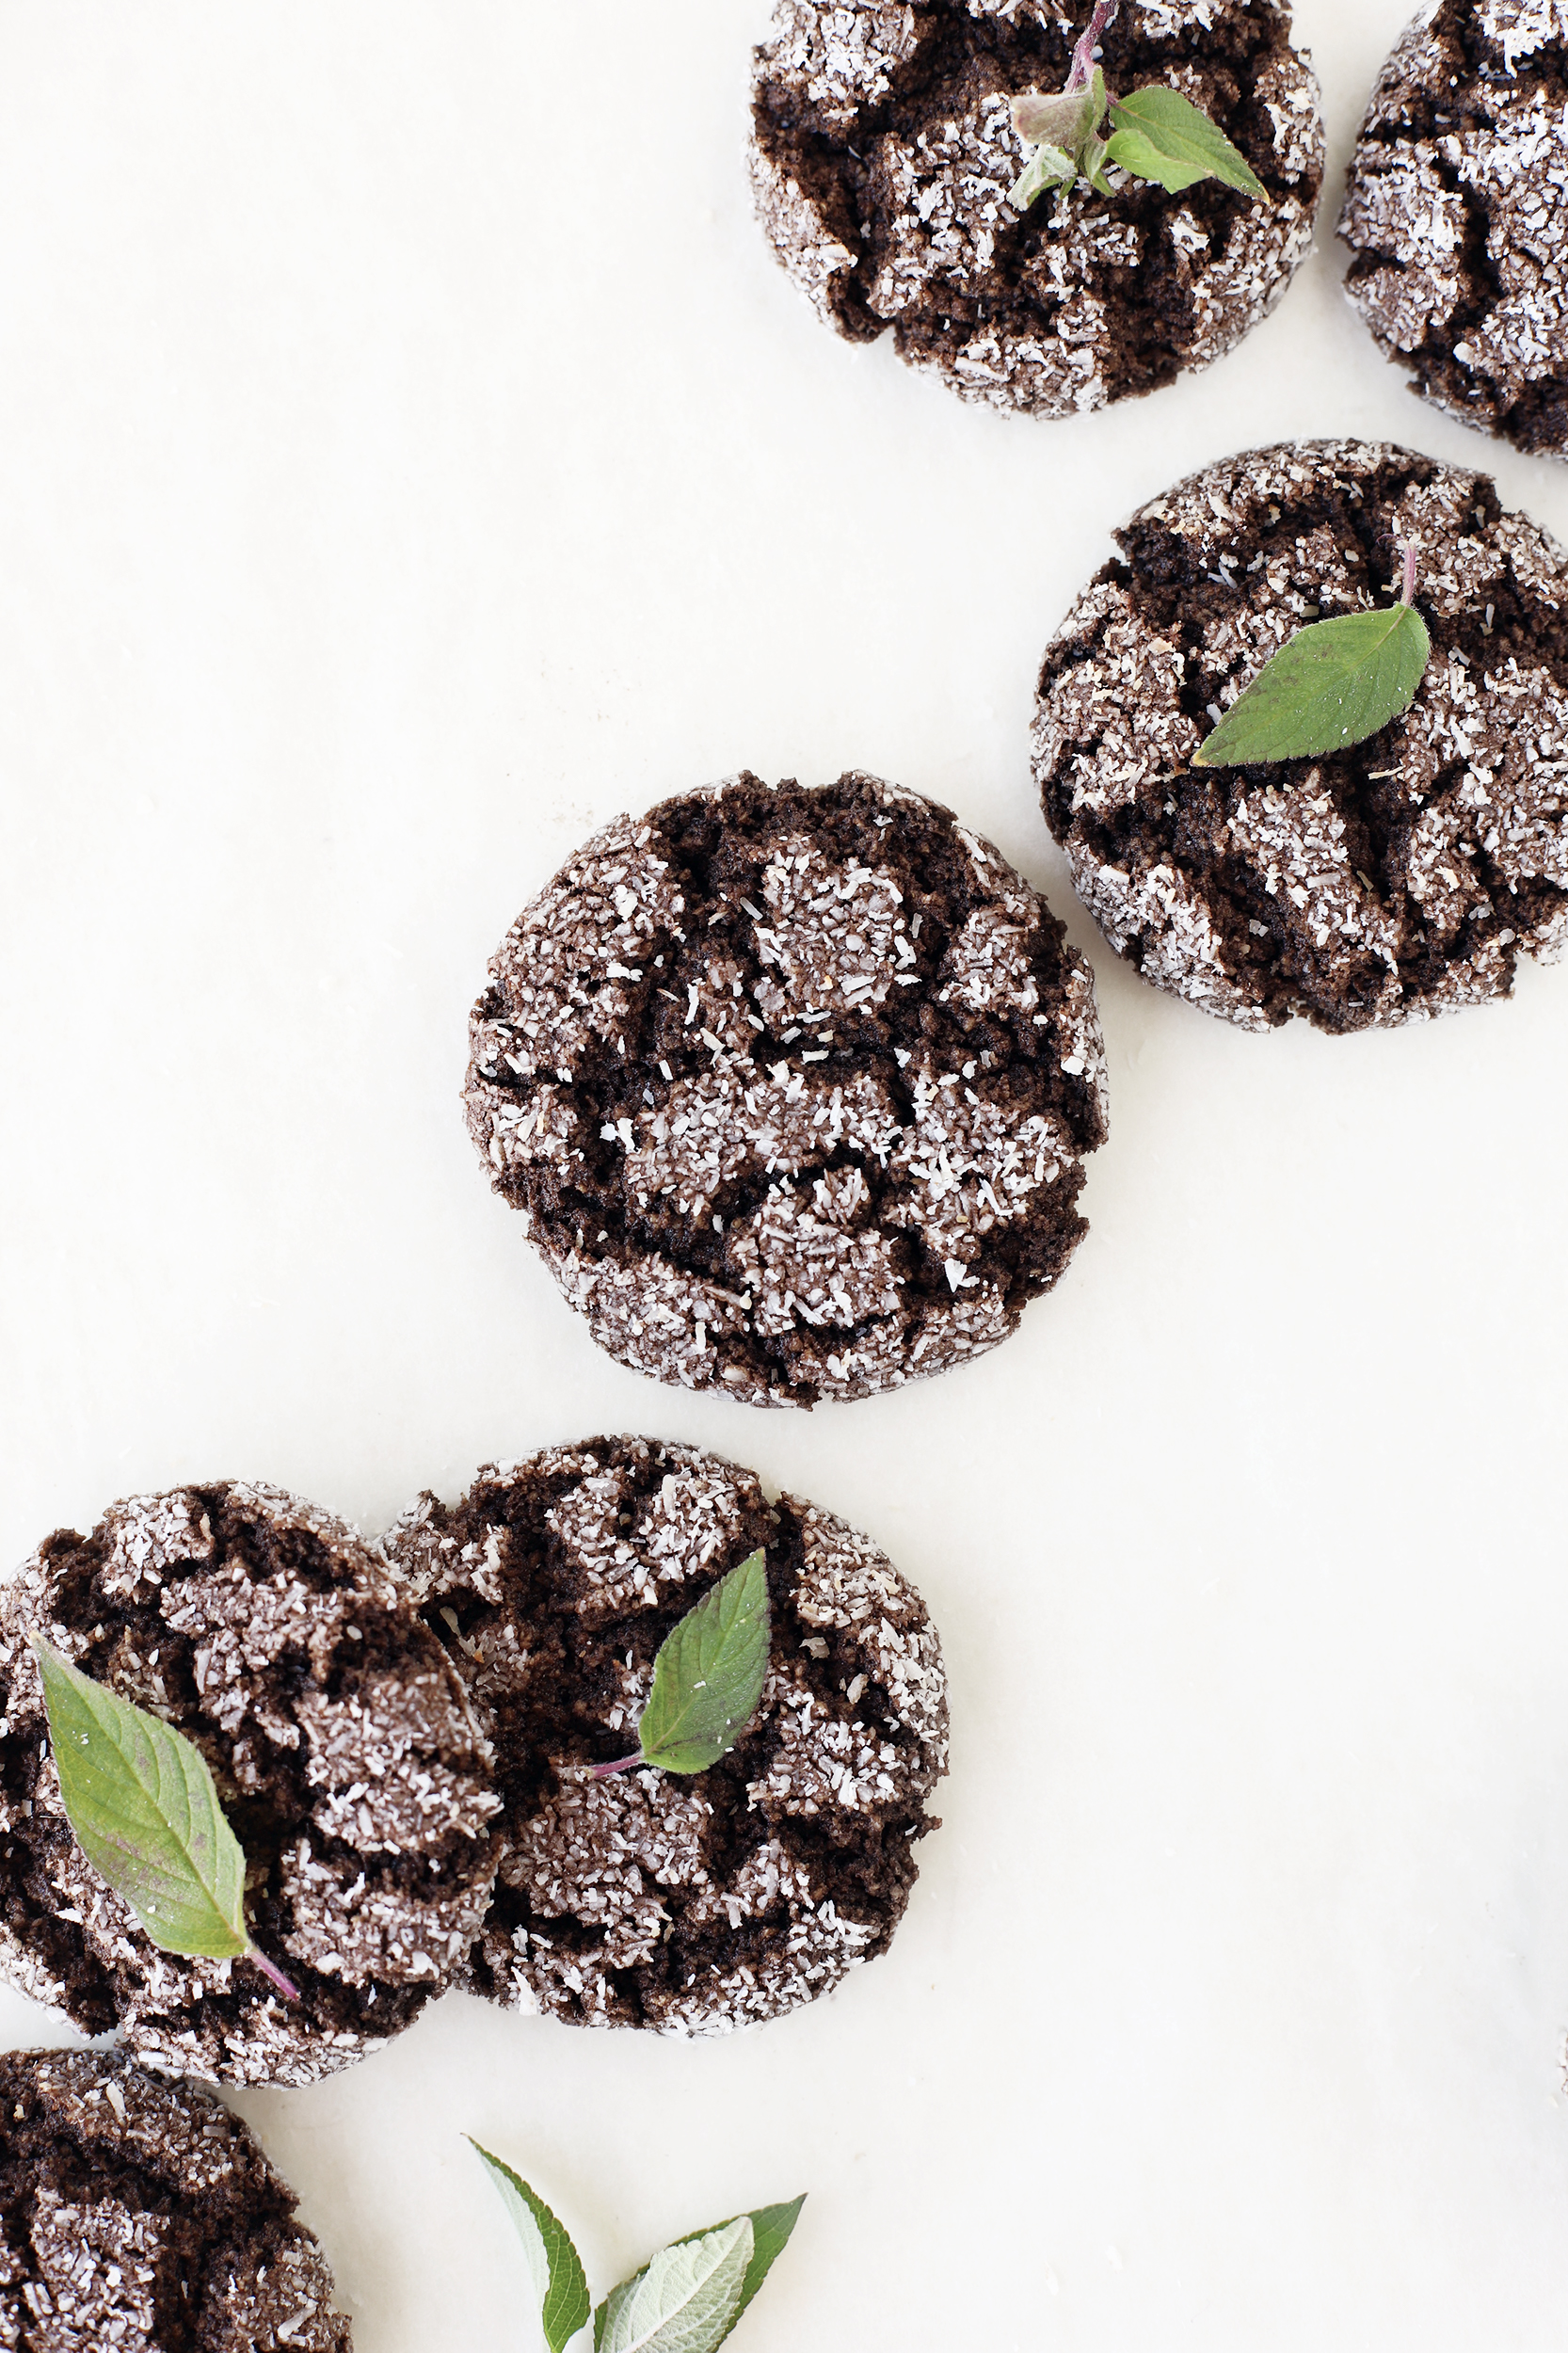 Rich and fudgy vegan dark chocolate peppermint crinkle cookies covered in powdered coconut and decorated with fresh mint leaves